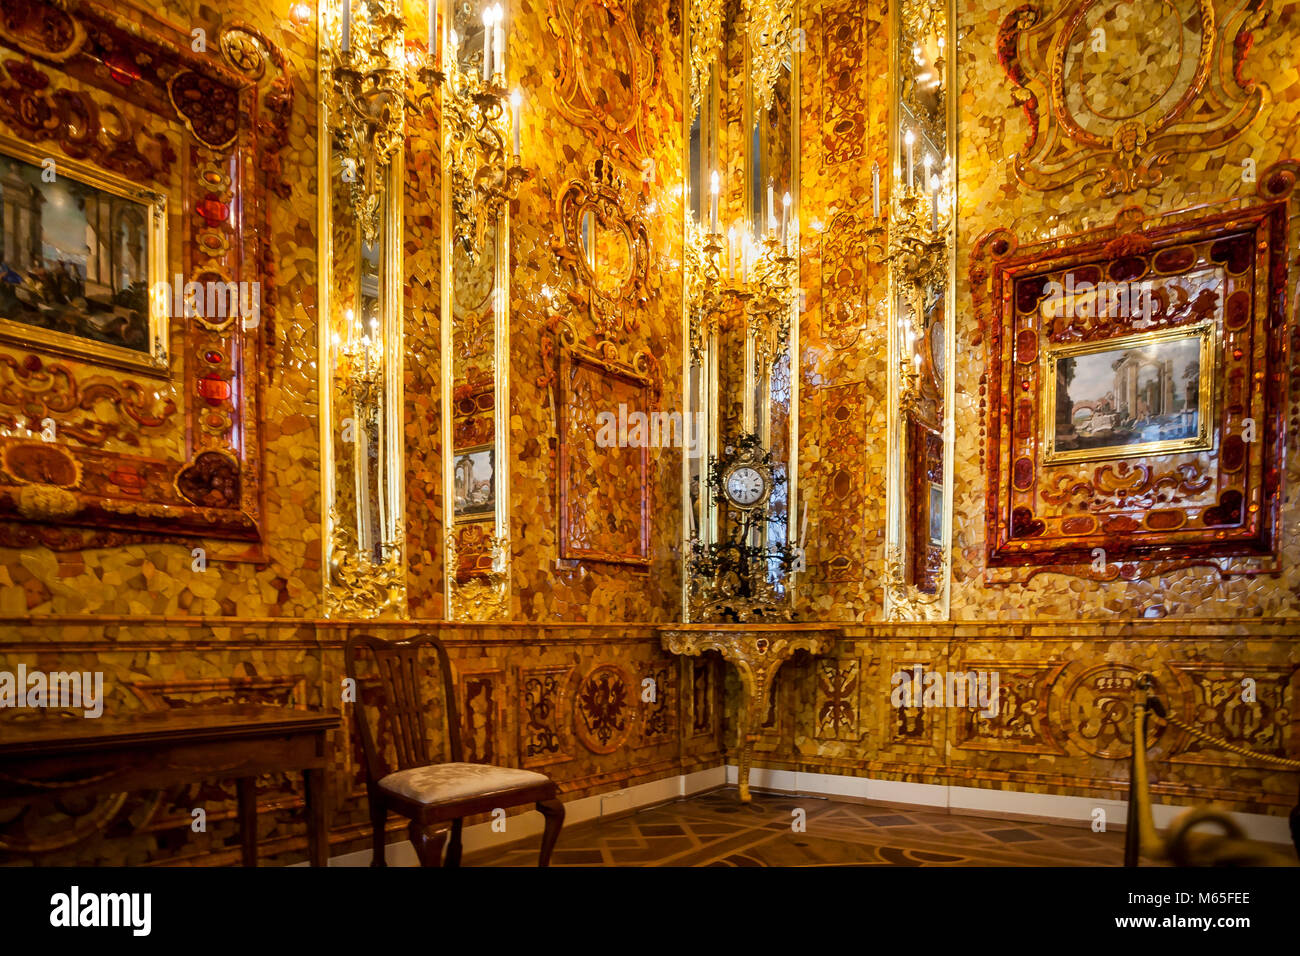 Amber Room in Catherine's Palace. St. Petersburg, Russia   © Myrleen Pearson.  ...Ferguson Cate Stock Photo